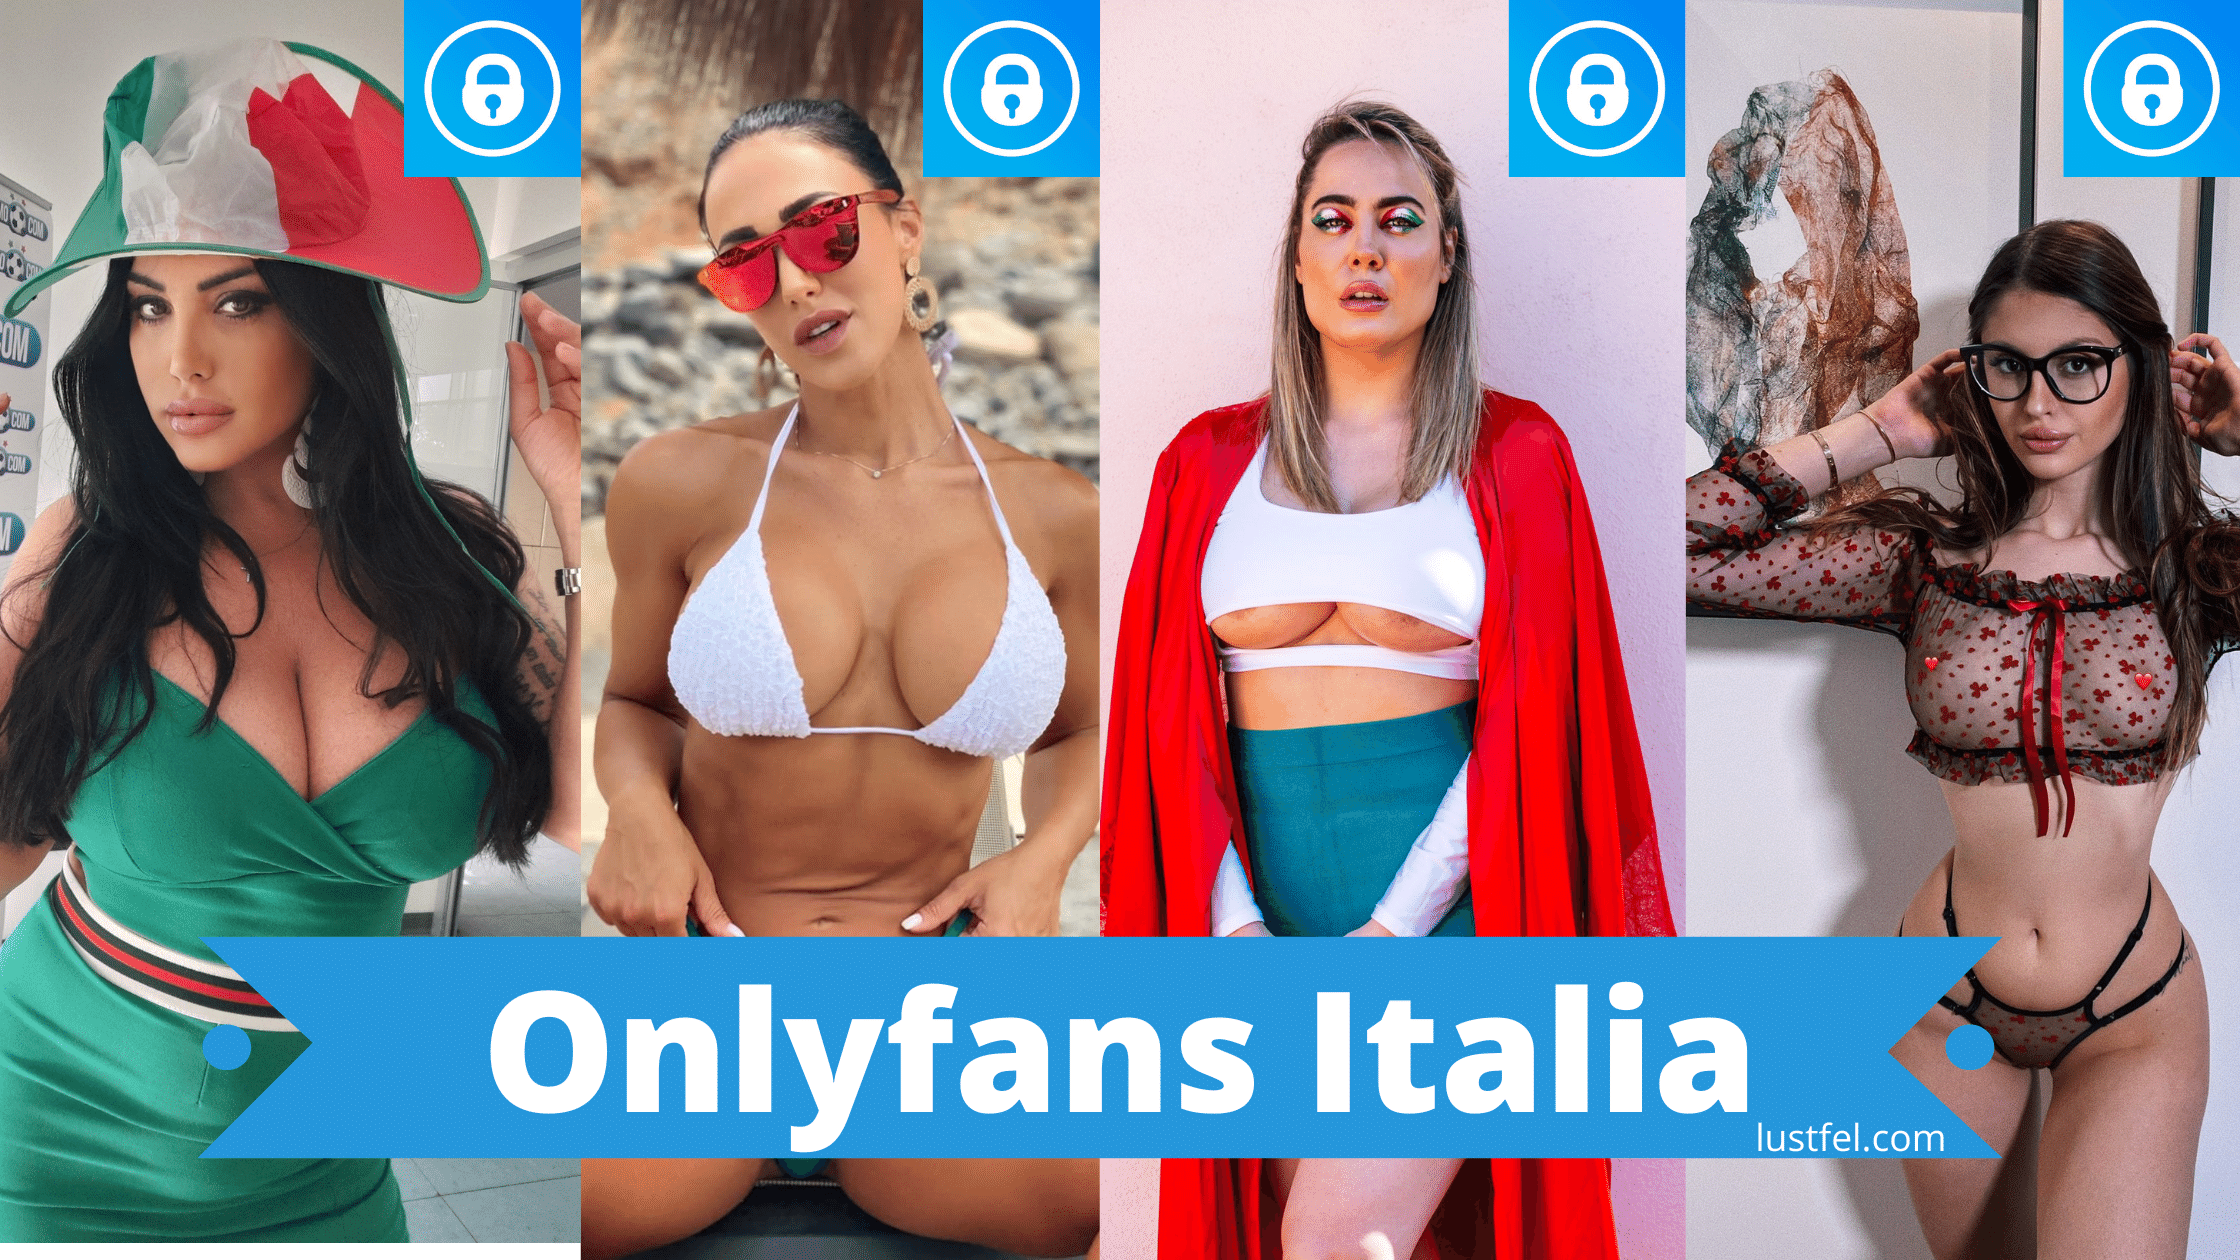 Sofia spams onlyfans